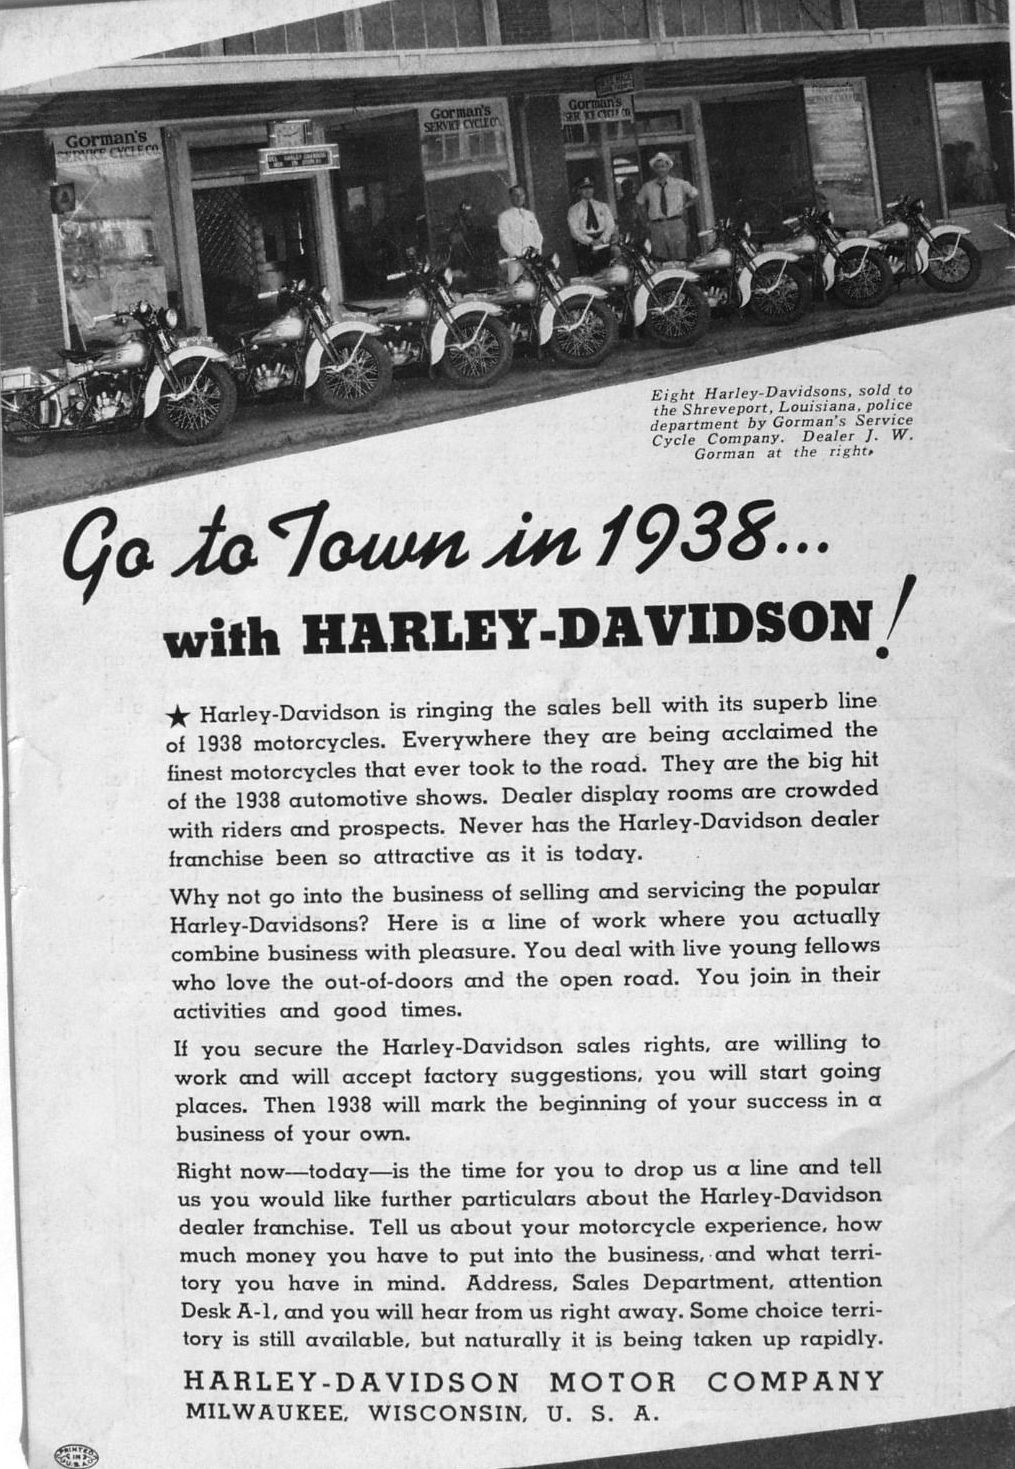 in 1938 with Harley-Davidson